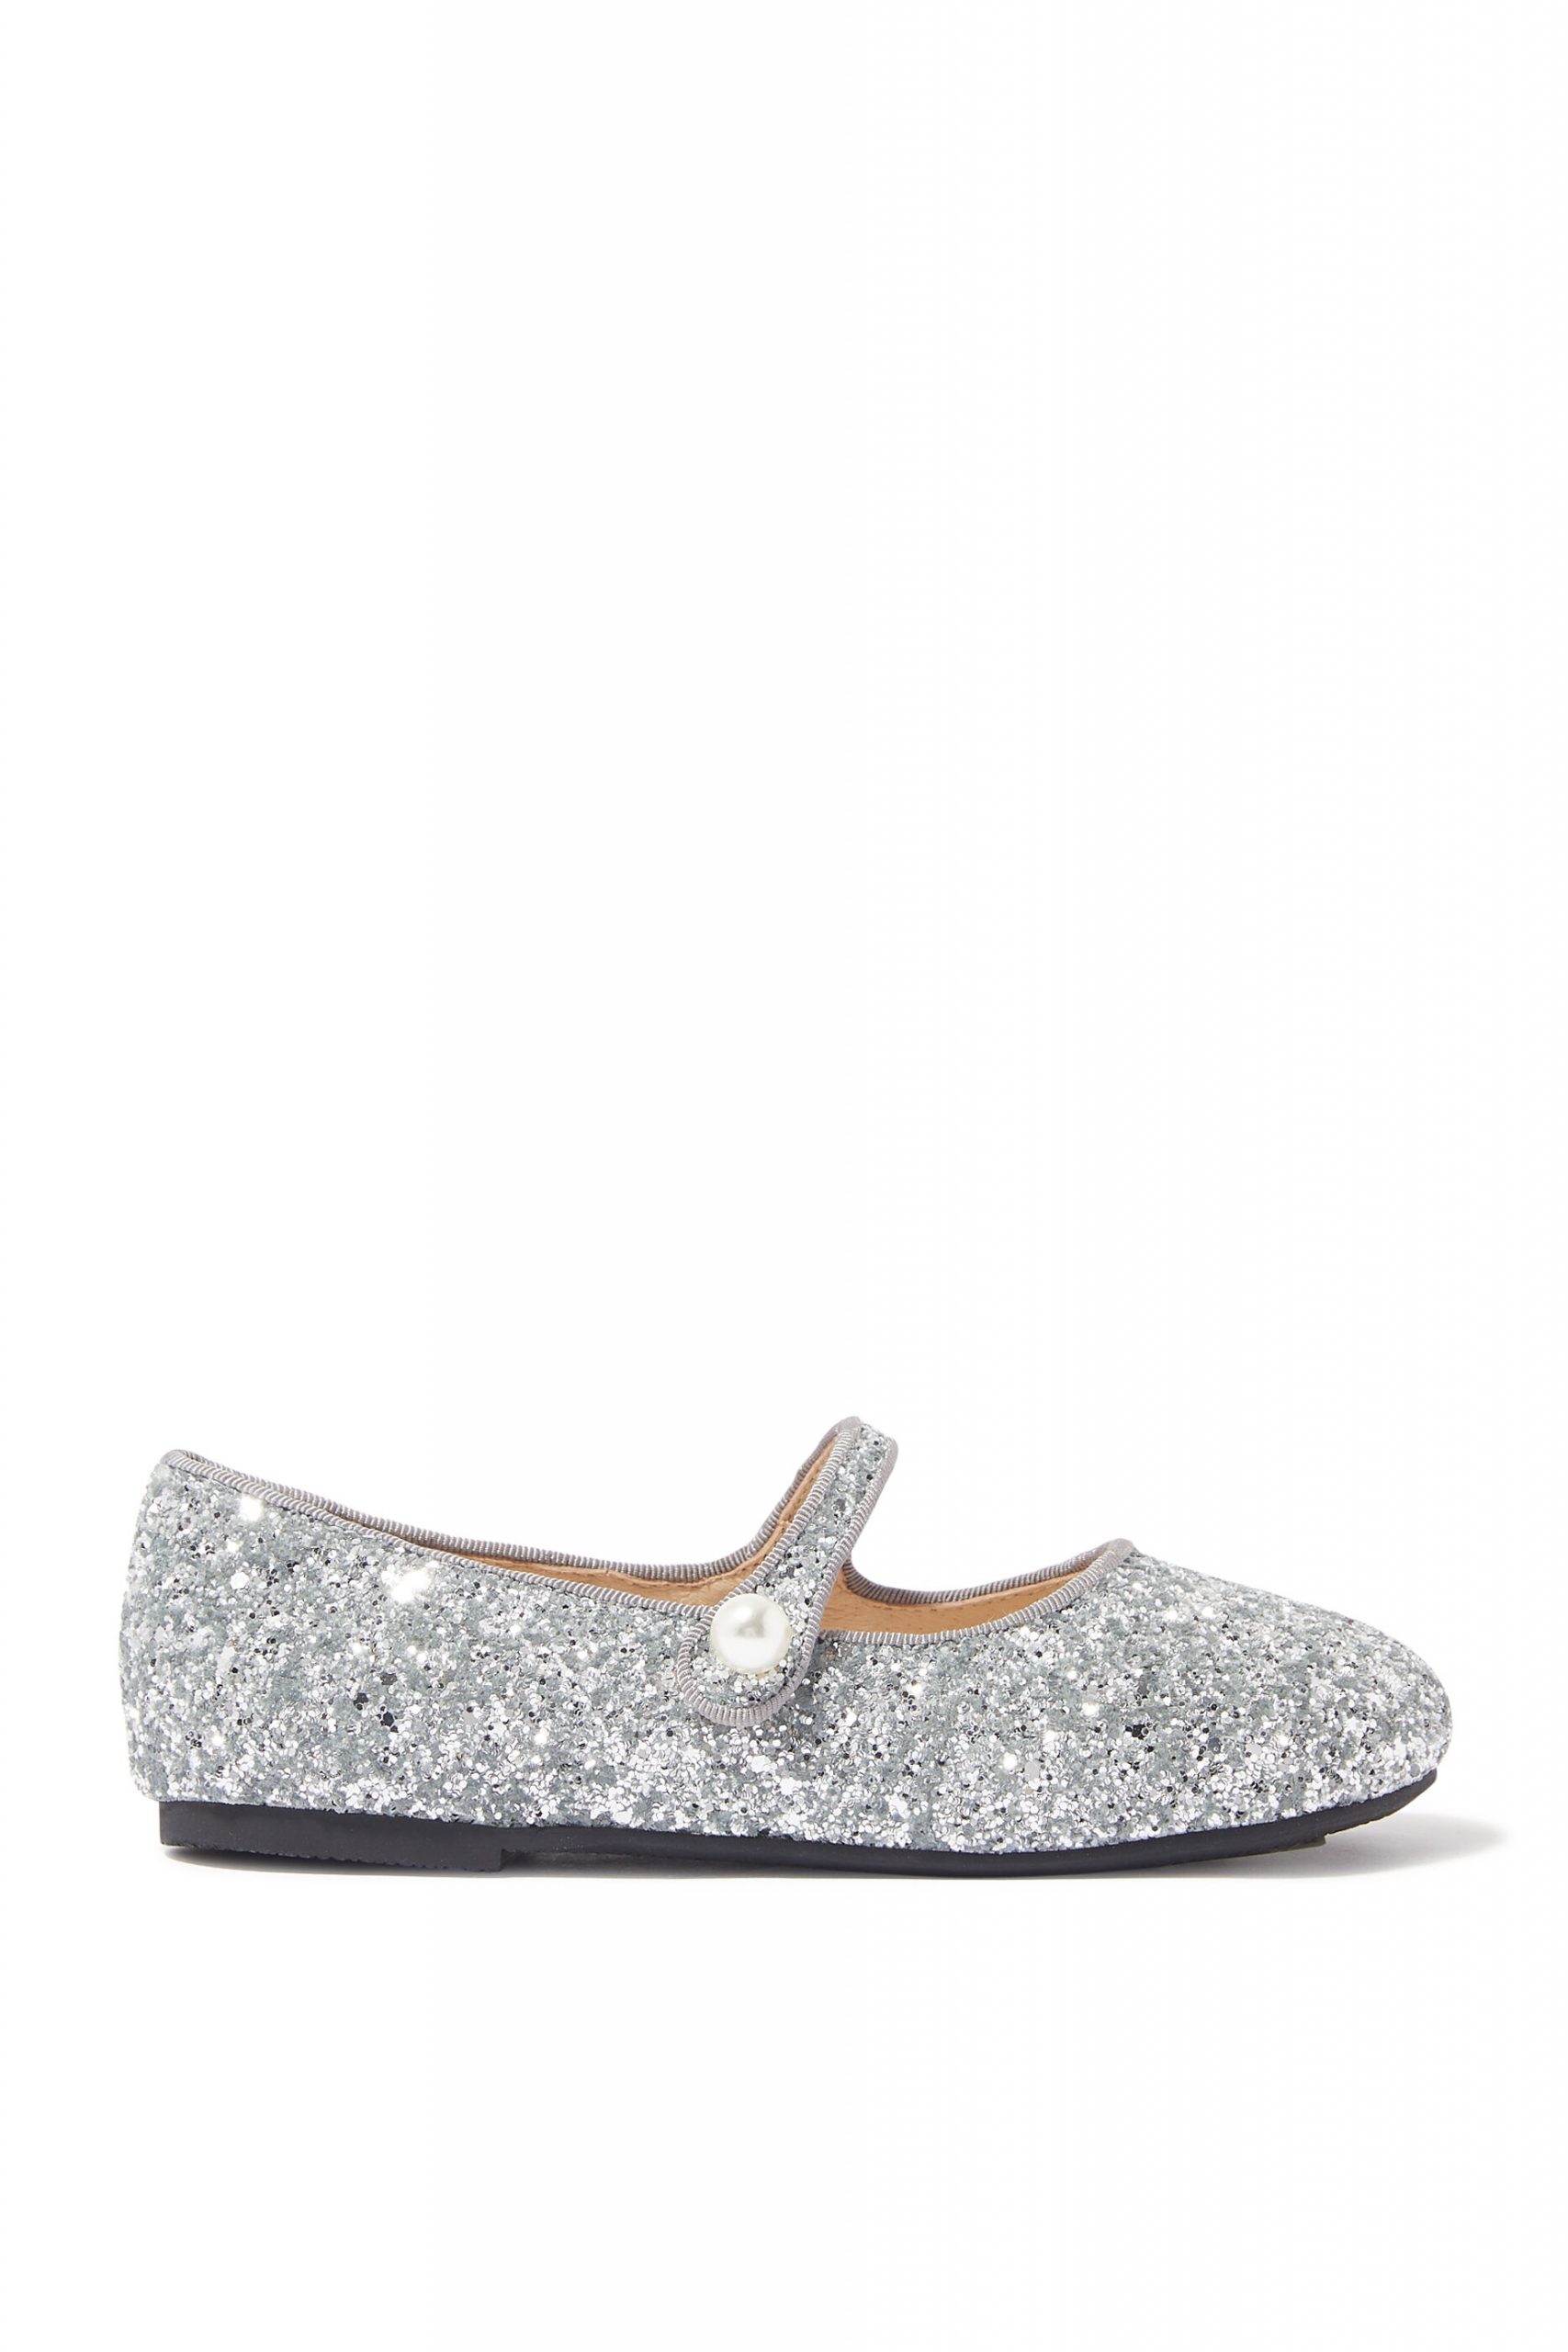 Age Of Innocence Sale Kids Elin Ballerina Flats on sale now at official ...